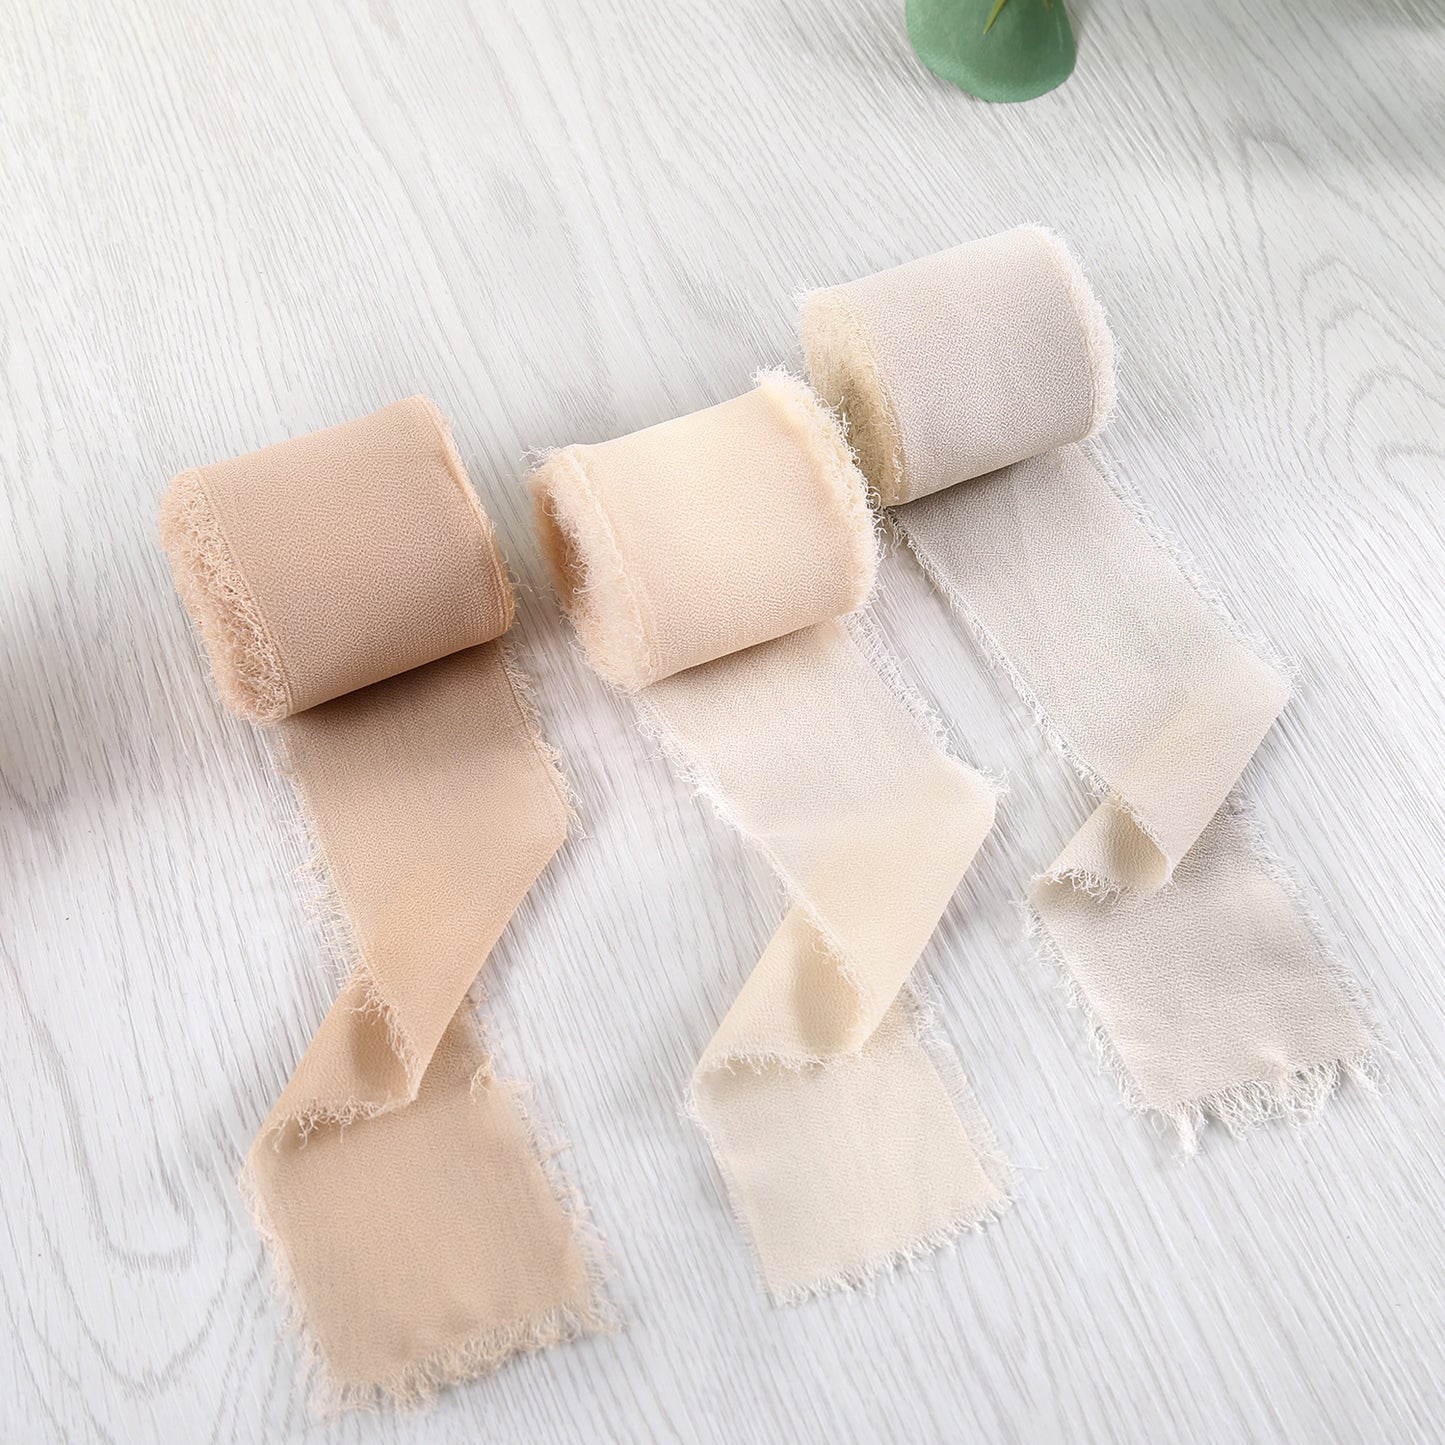 Handmade Fringe Chiffon Silk-Like Ribbon 2" x 7Yd Set of 3 Rolls Ribbons for Wedding Invitations, Bouquets, Gift Wrapping (3 Rolls Nude/Cream/Sand Color)